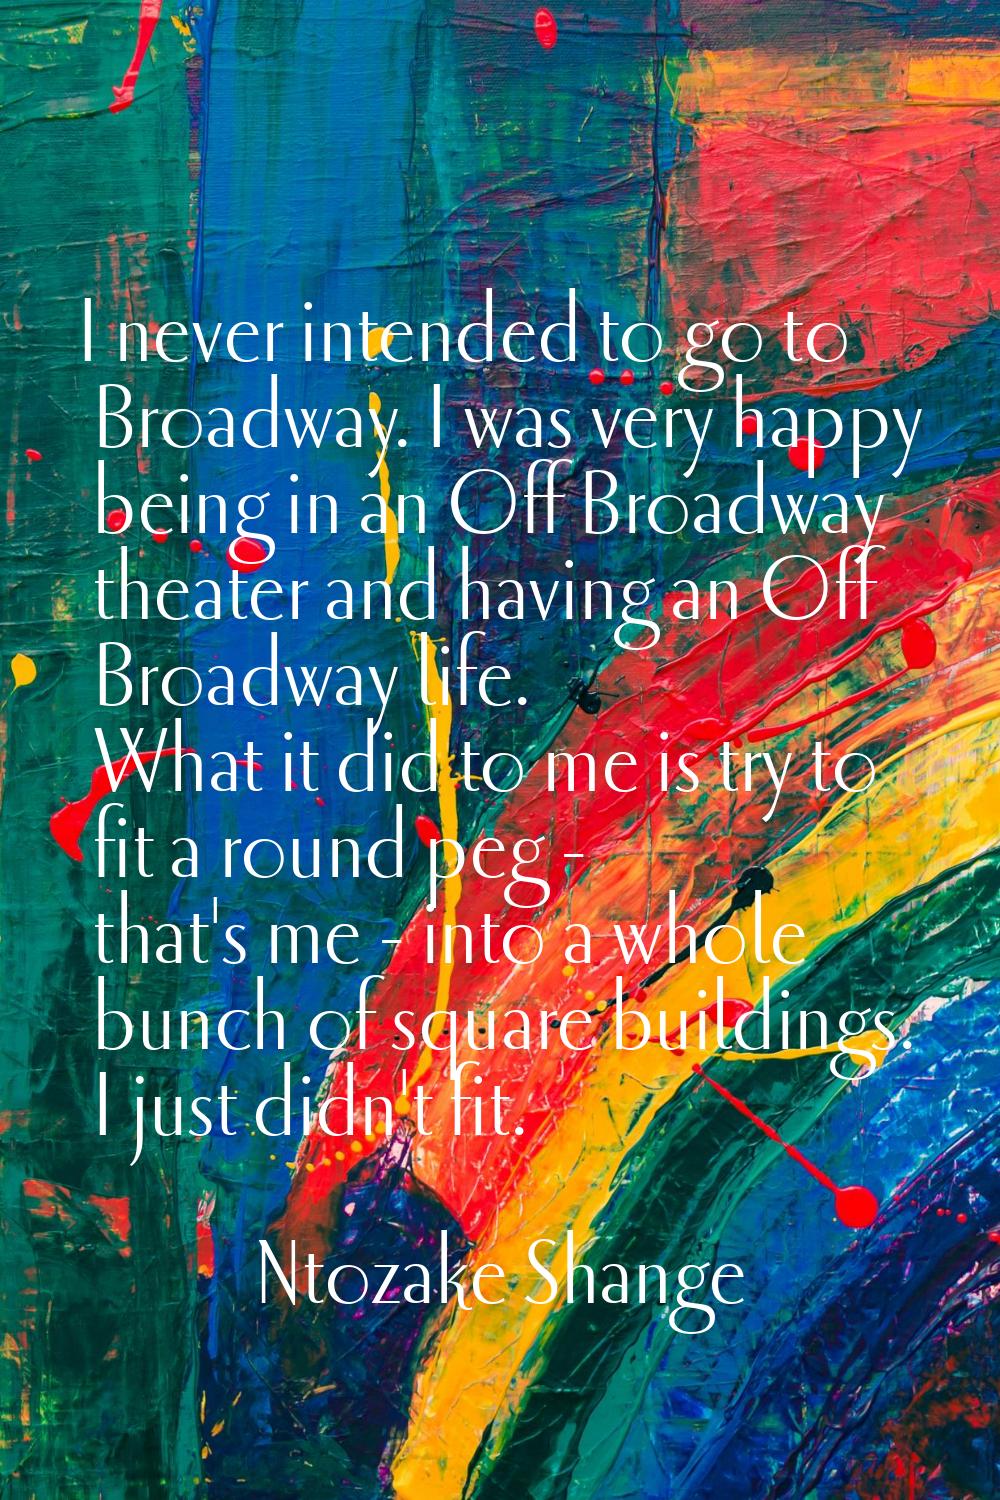 I never intended to go to Broadway. I was very happy being in an Off Broadway theater and having an